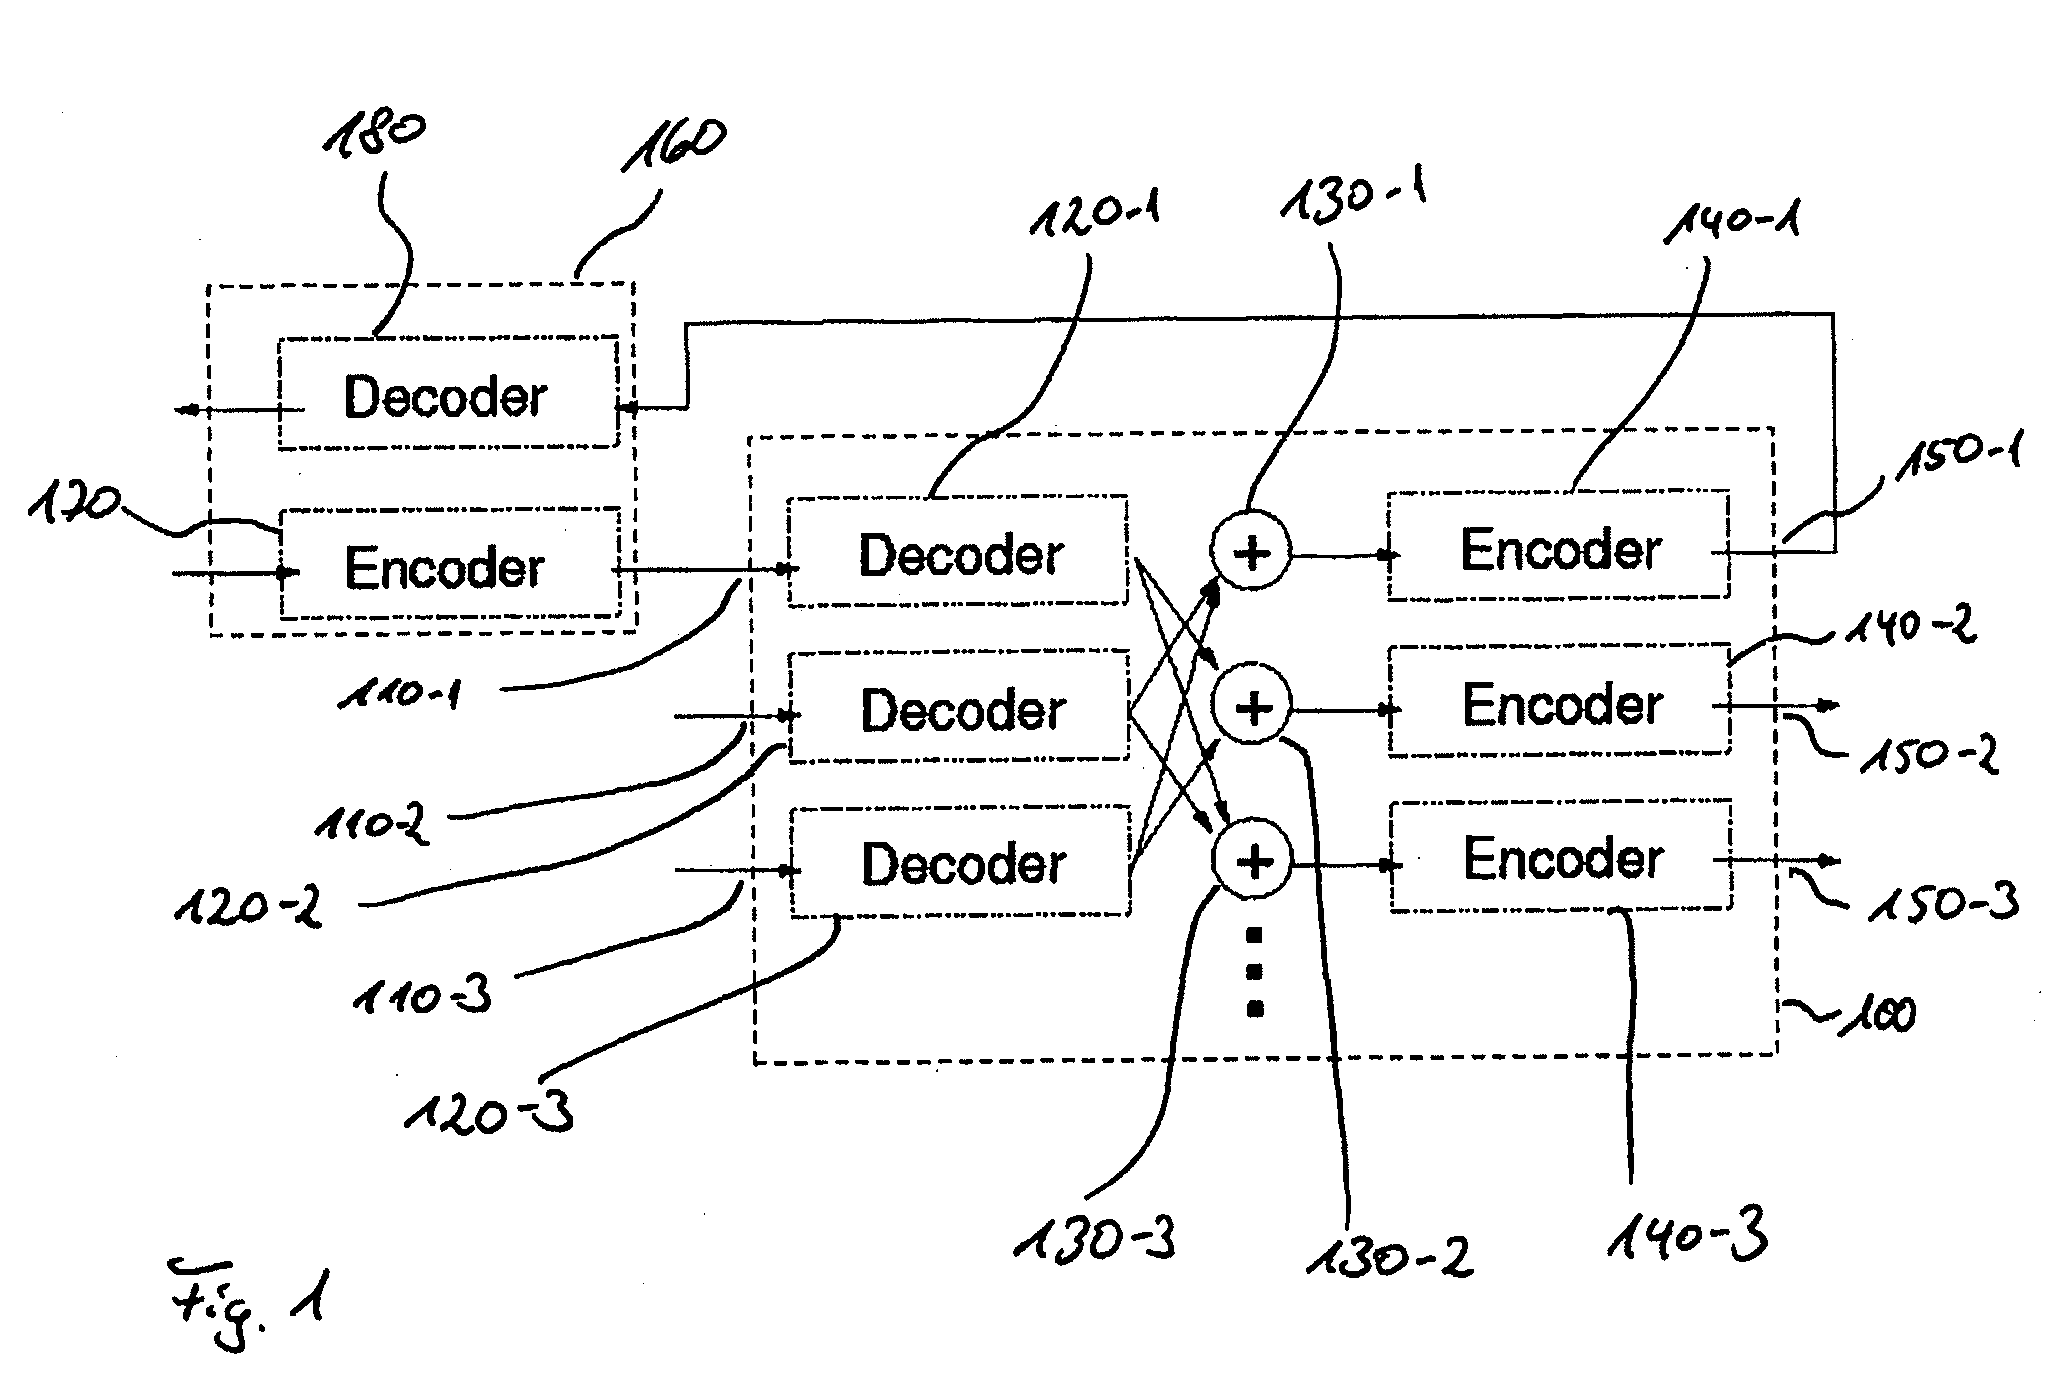 Mixing of Input Data Streams and Generation of an Output Data Stream Thereform